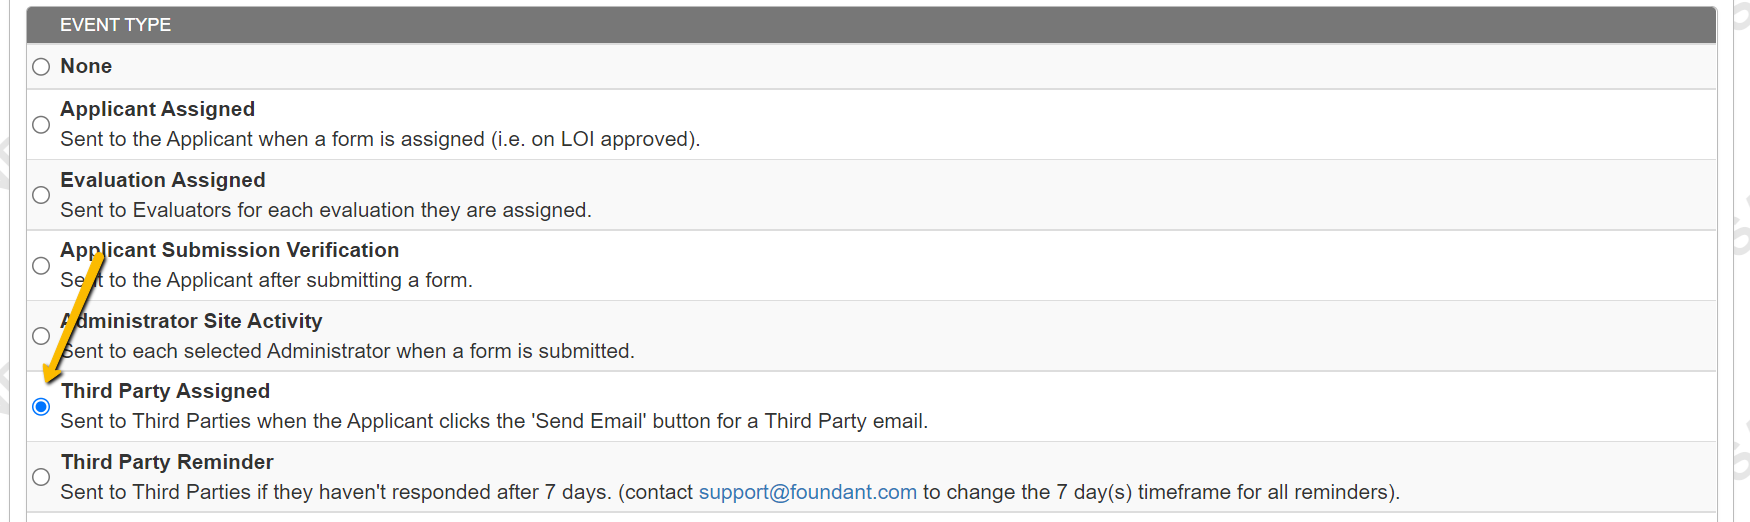 9.20.22_Build_Third_Party_Email_Templates_3.png